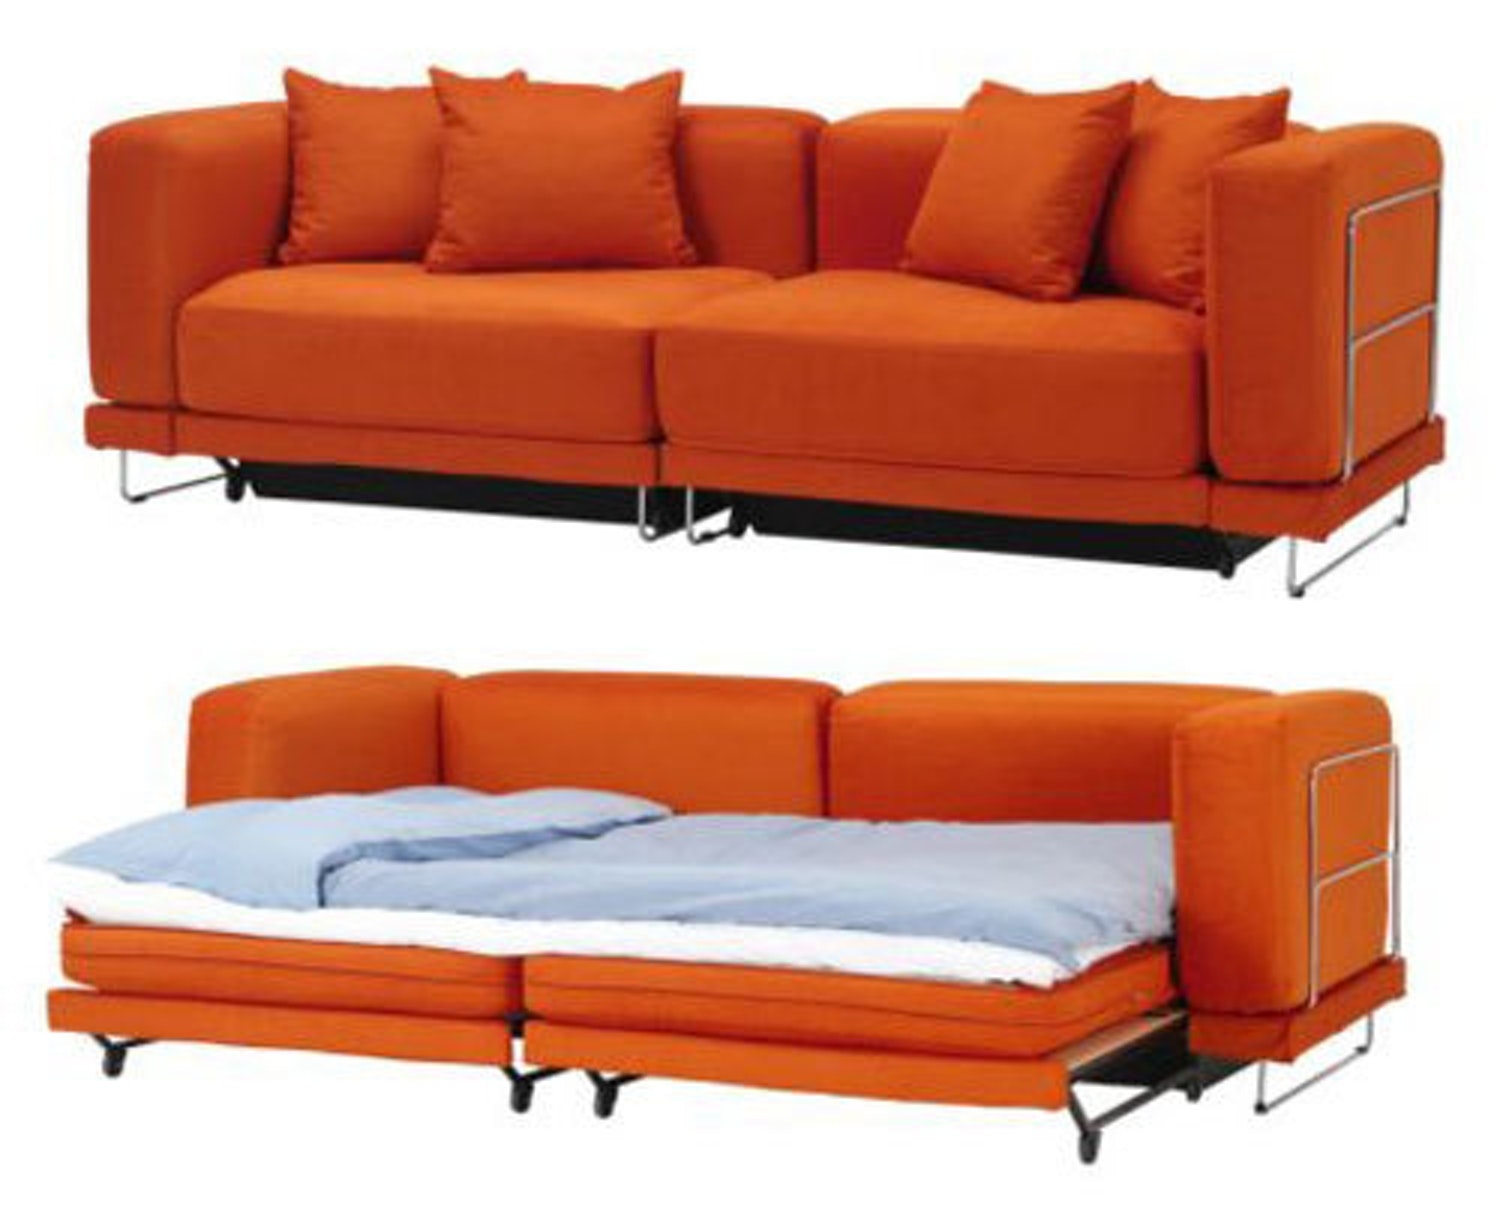 Sofa bed for the spare room or office